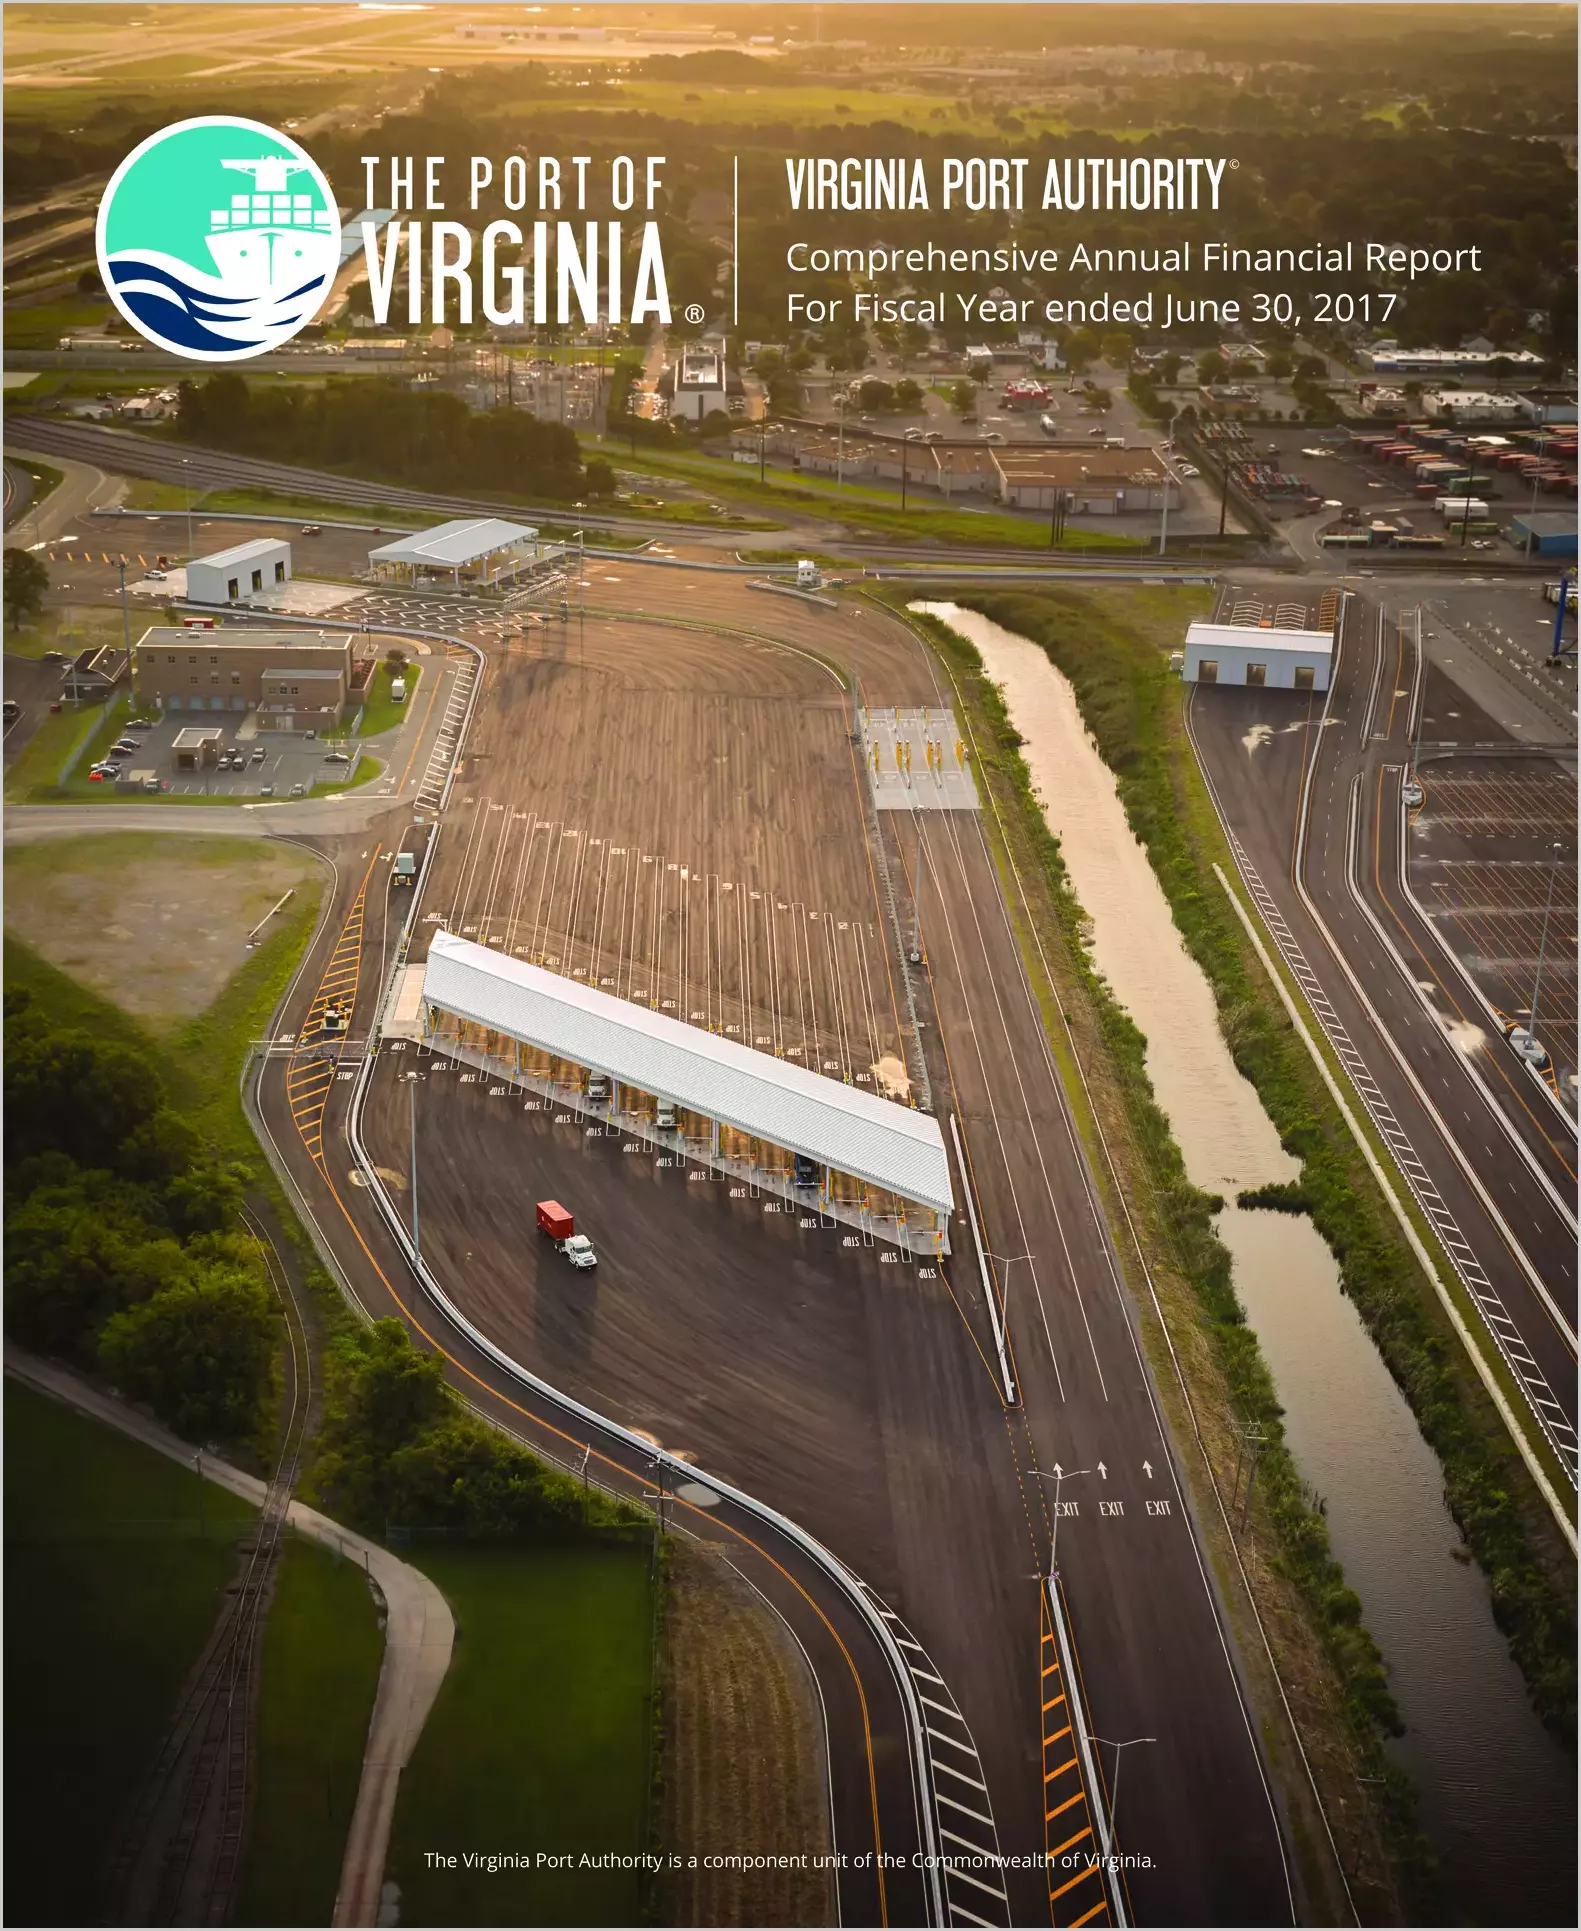 Virginia Port Authority Financial Statements for the year ended June 30, 2017